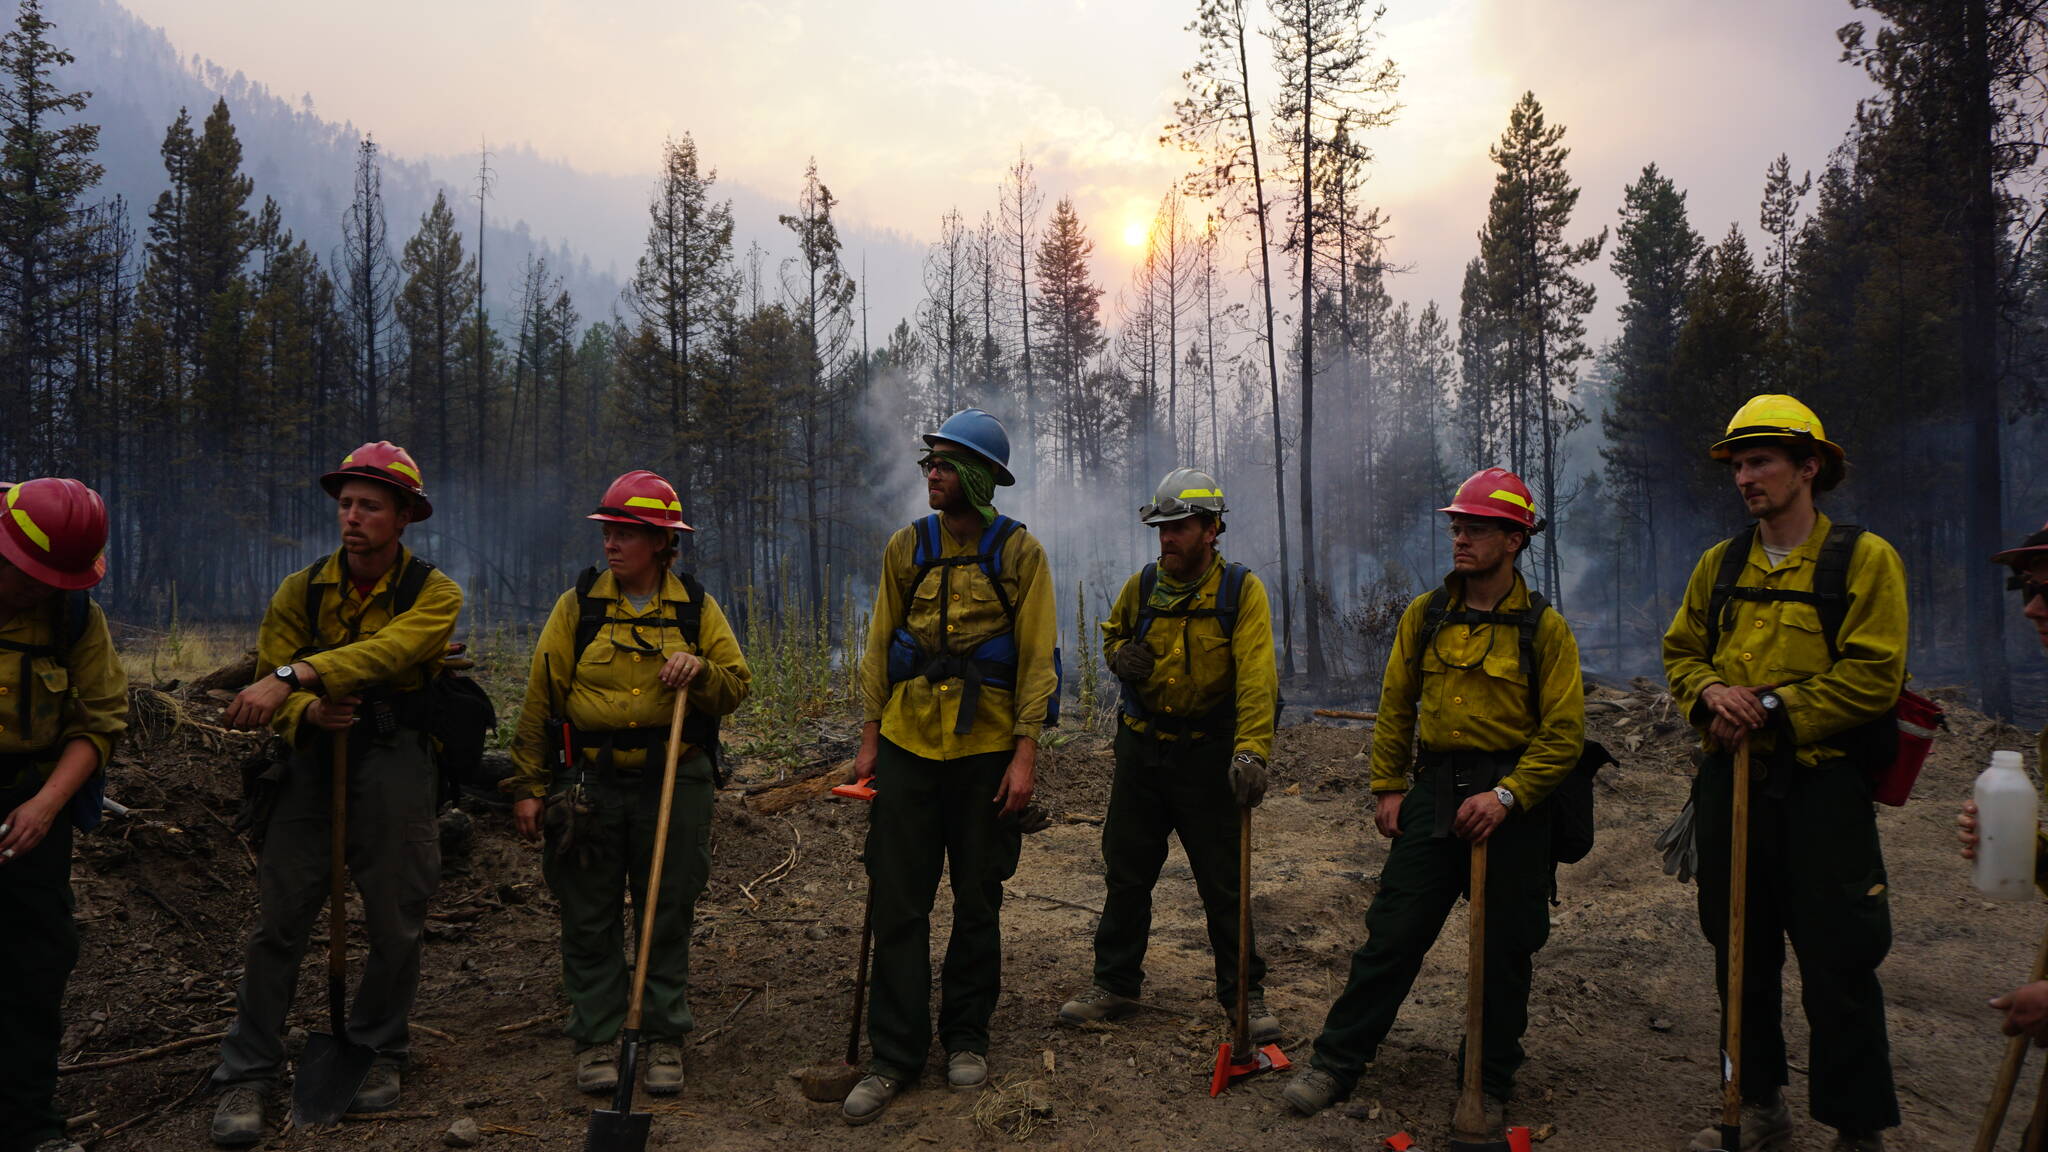 Courtesy photo / Parker Anders
A Forest Service fire crew gets brief during an operation. Fire crews from Alaska are frequently deployed to the Lower 48 to help combat wildfires that are growing larger and closer to urban areas in many cases.